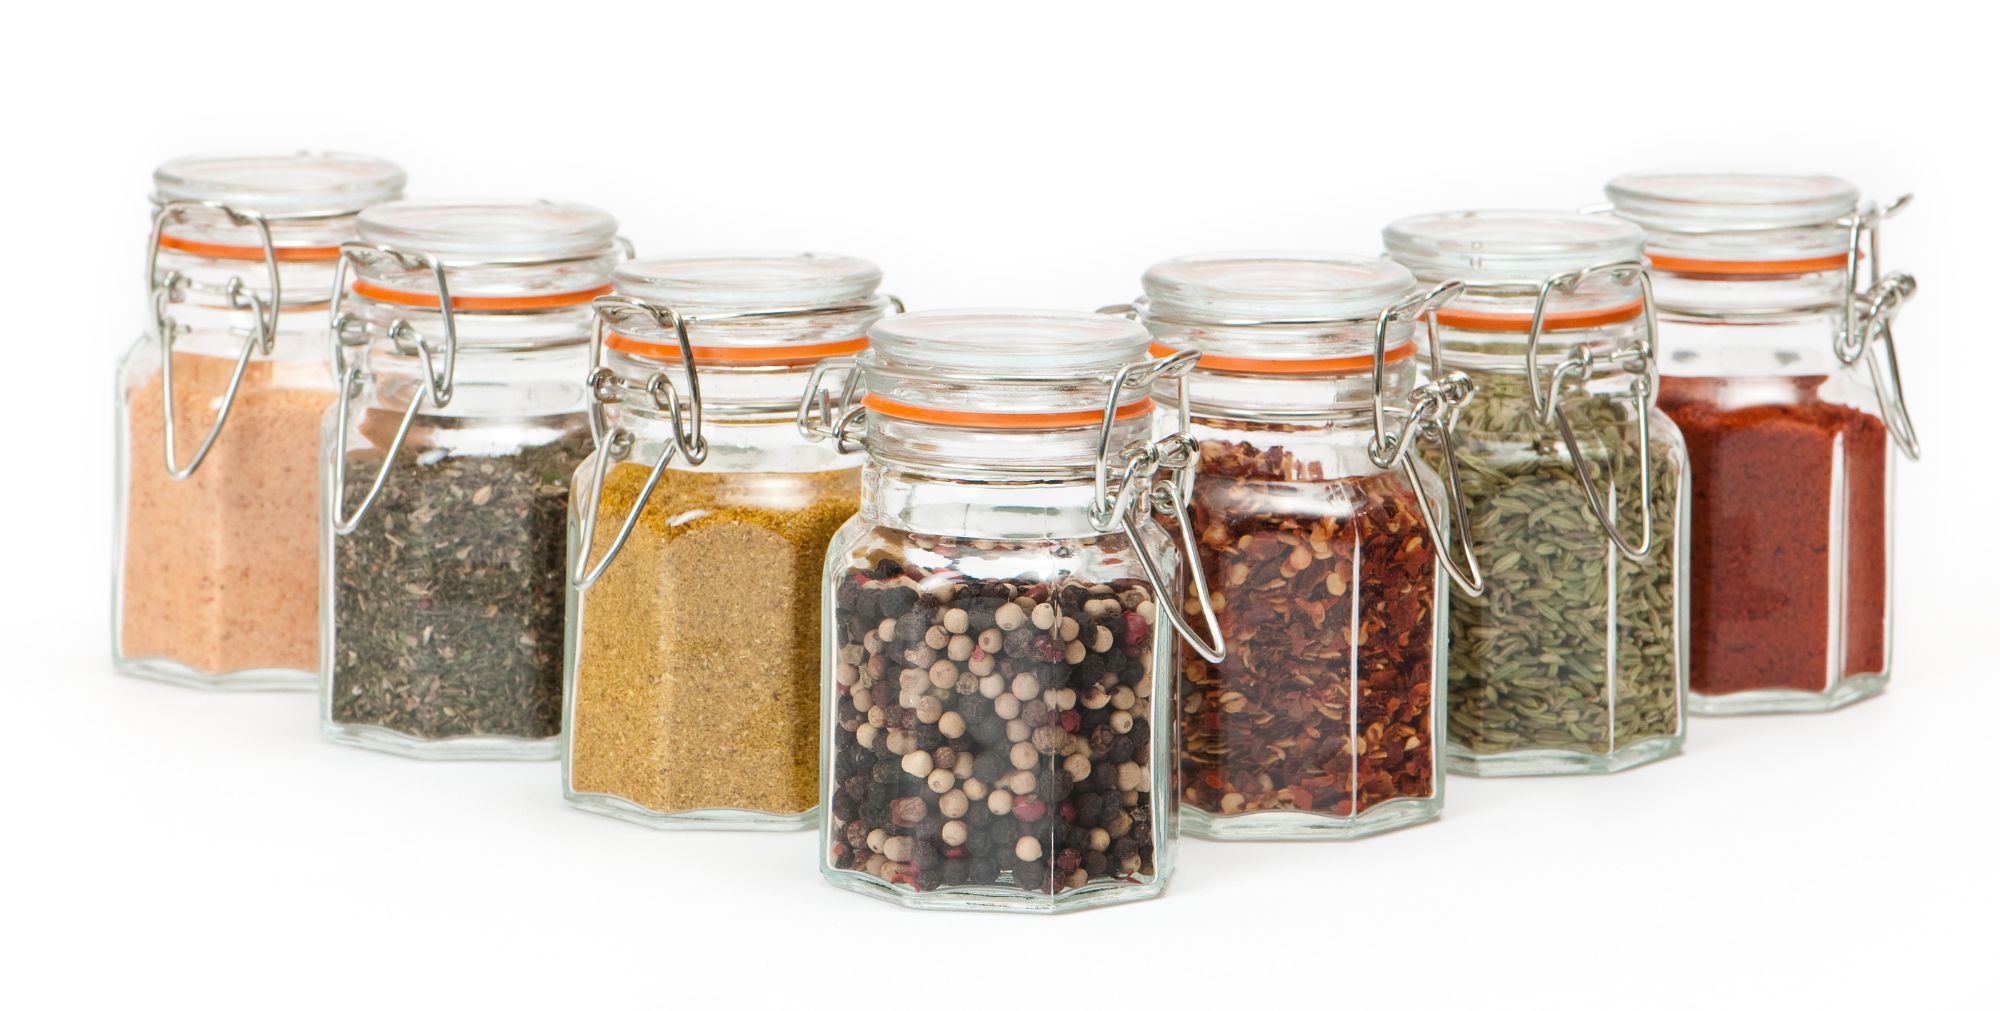 Spice bottles and powders